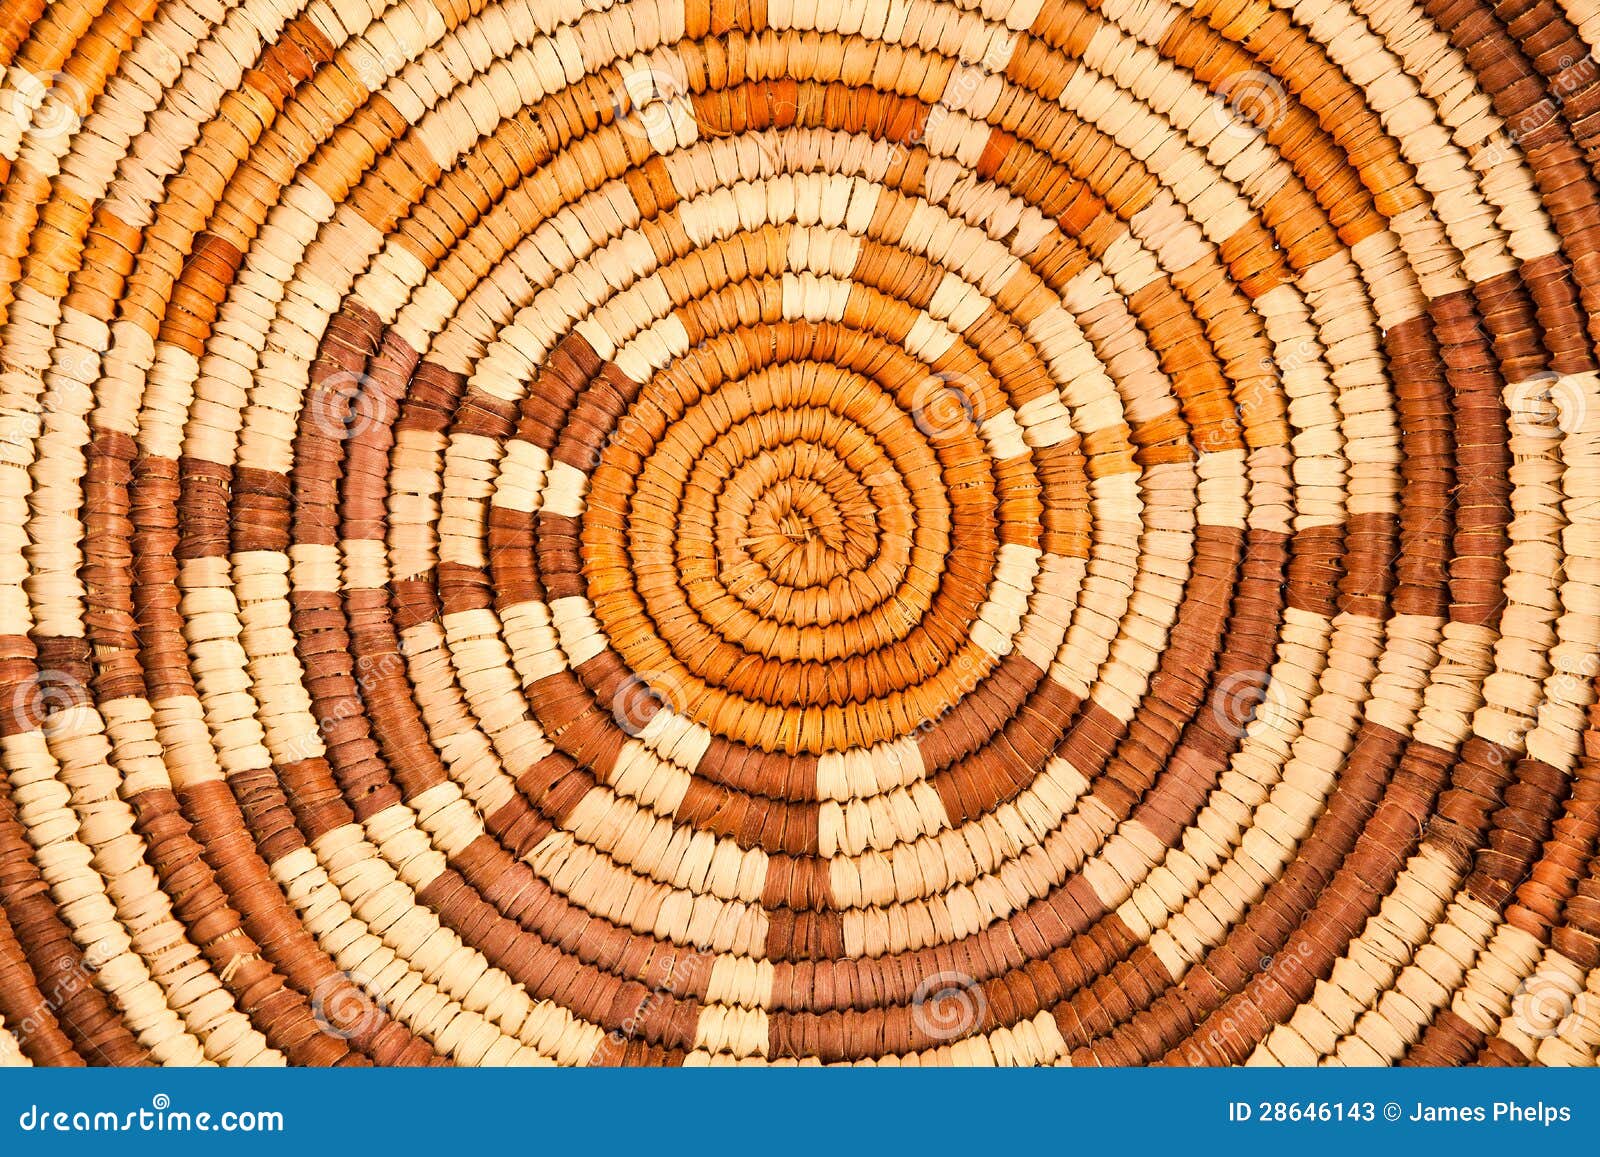 native american woven background pattern